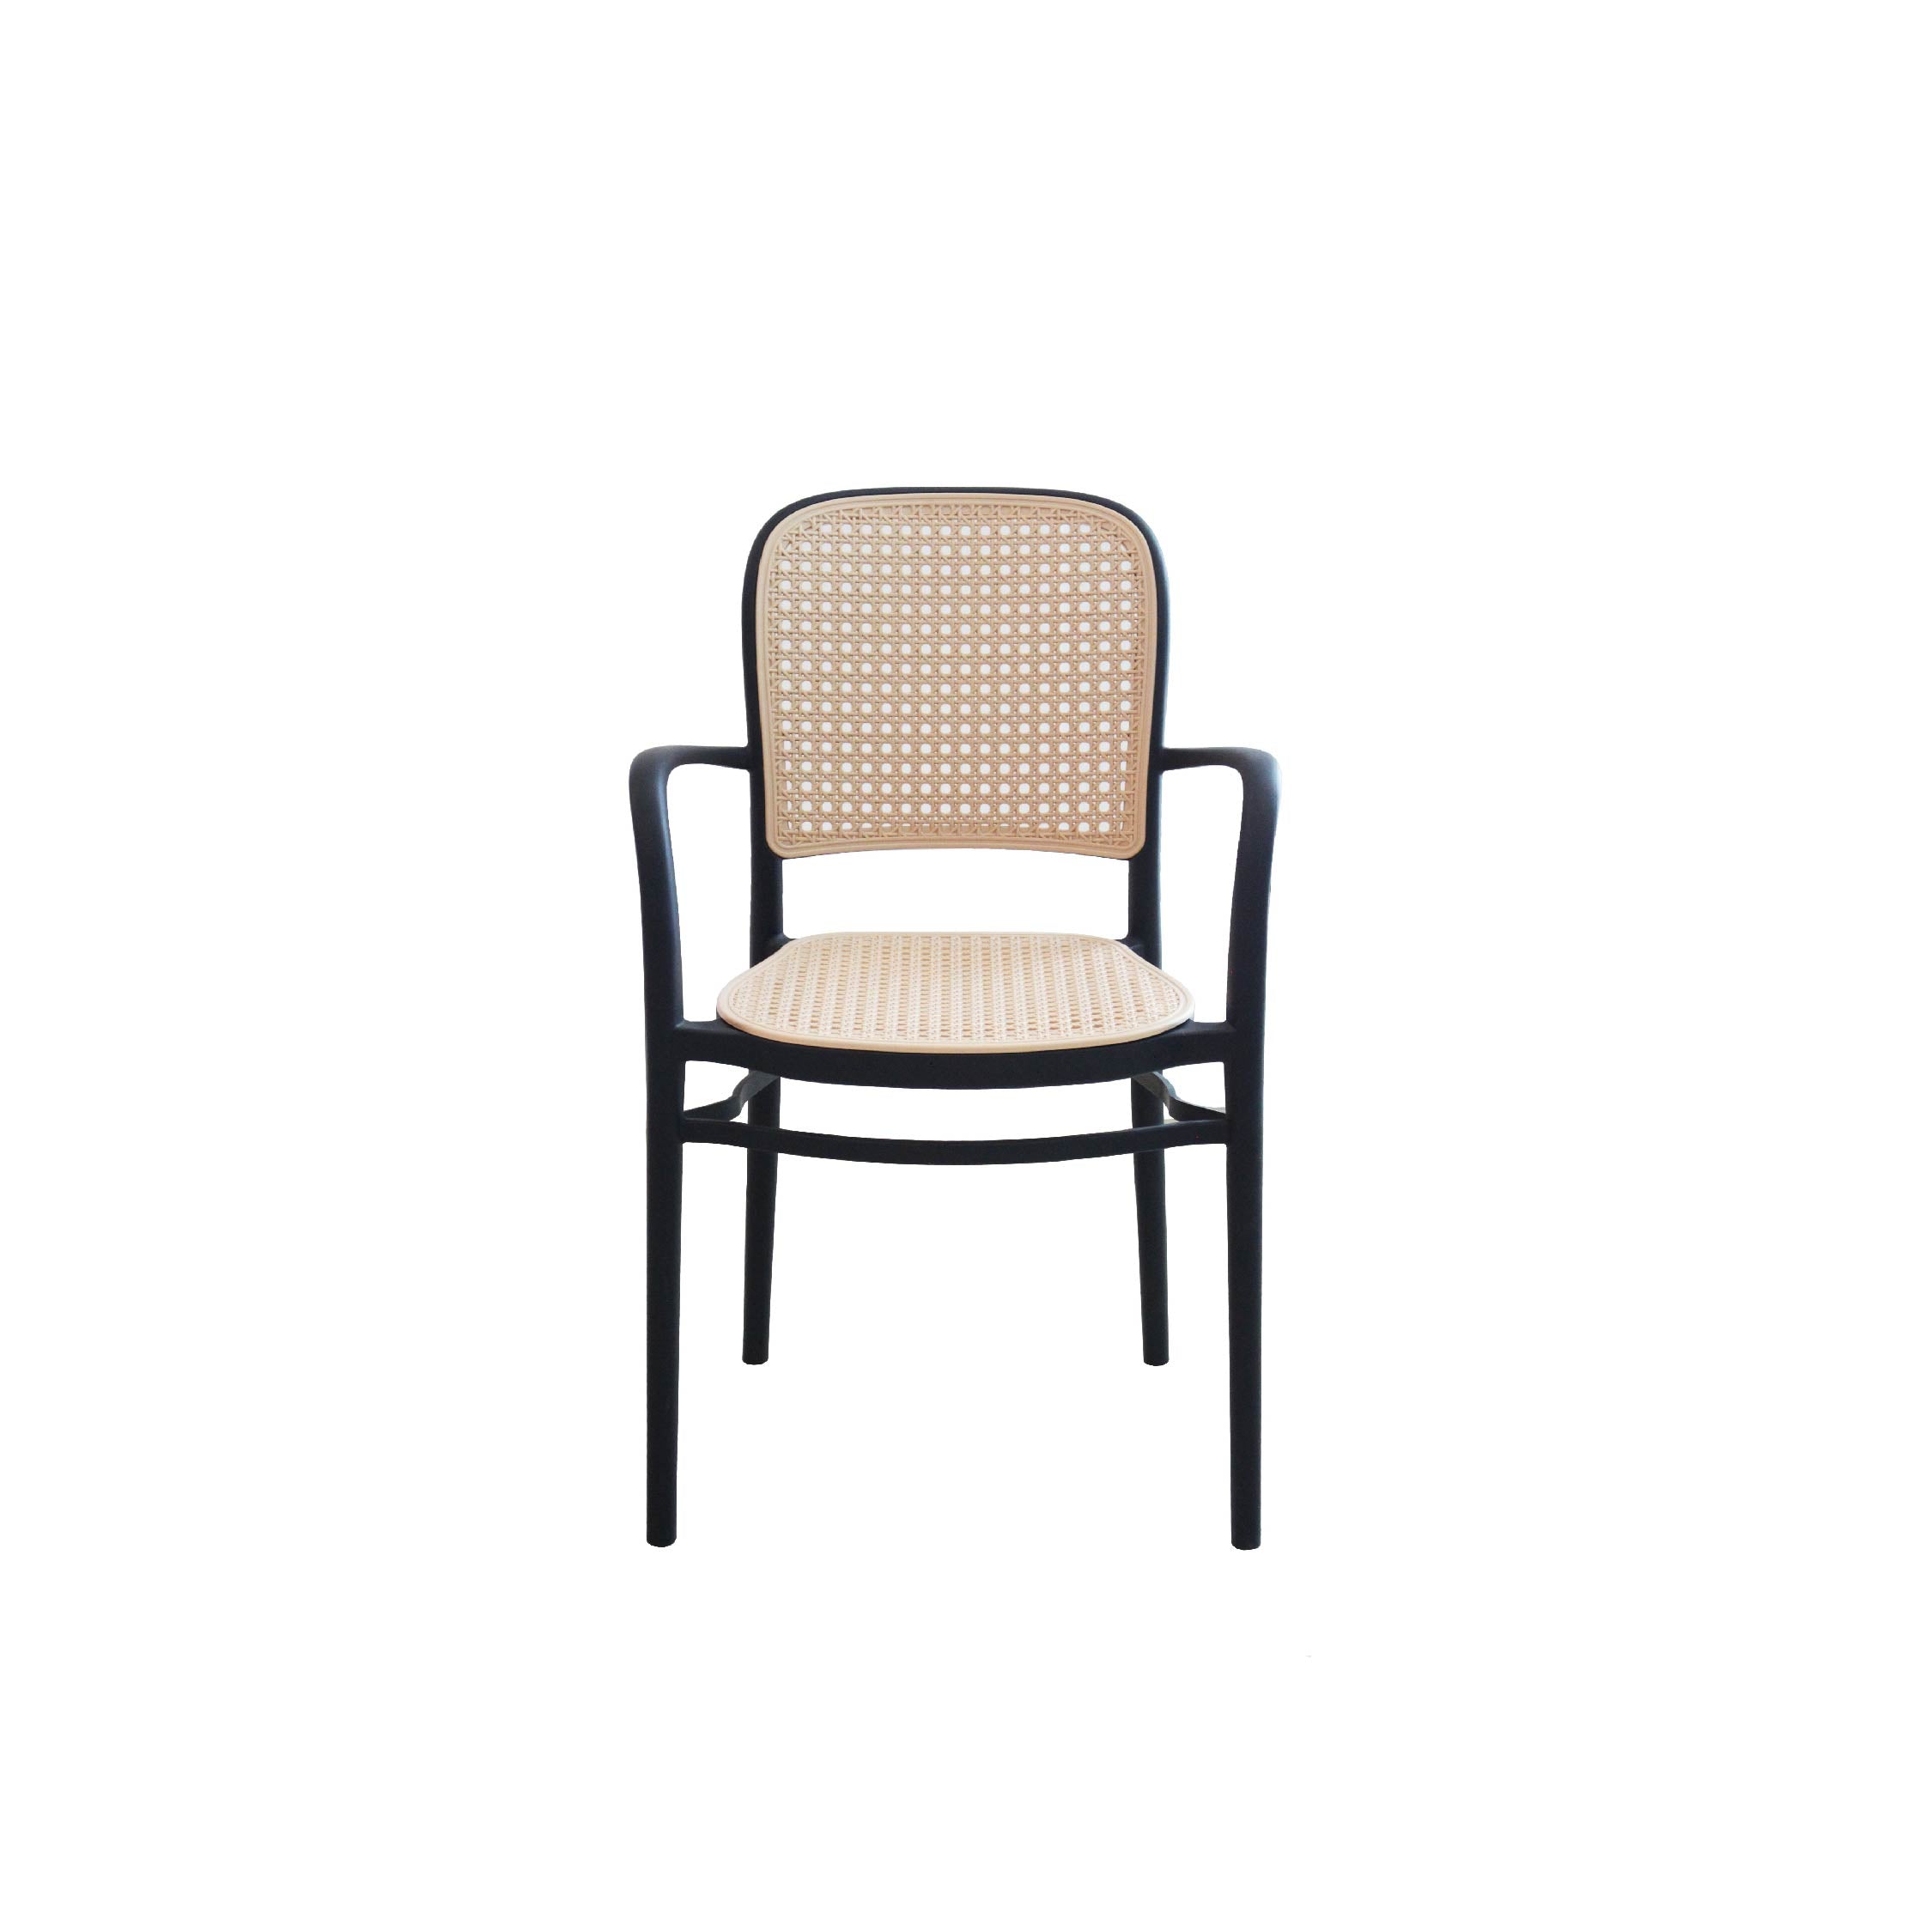 PATI Chair 174 with Arm